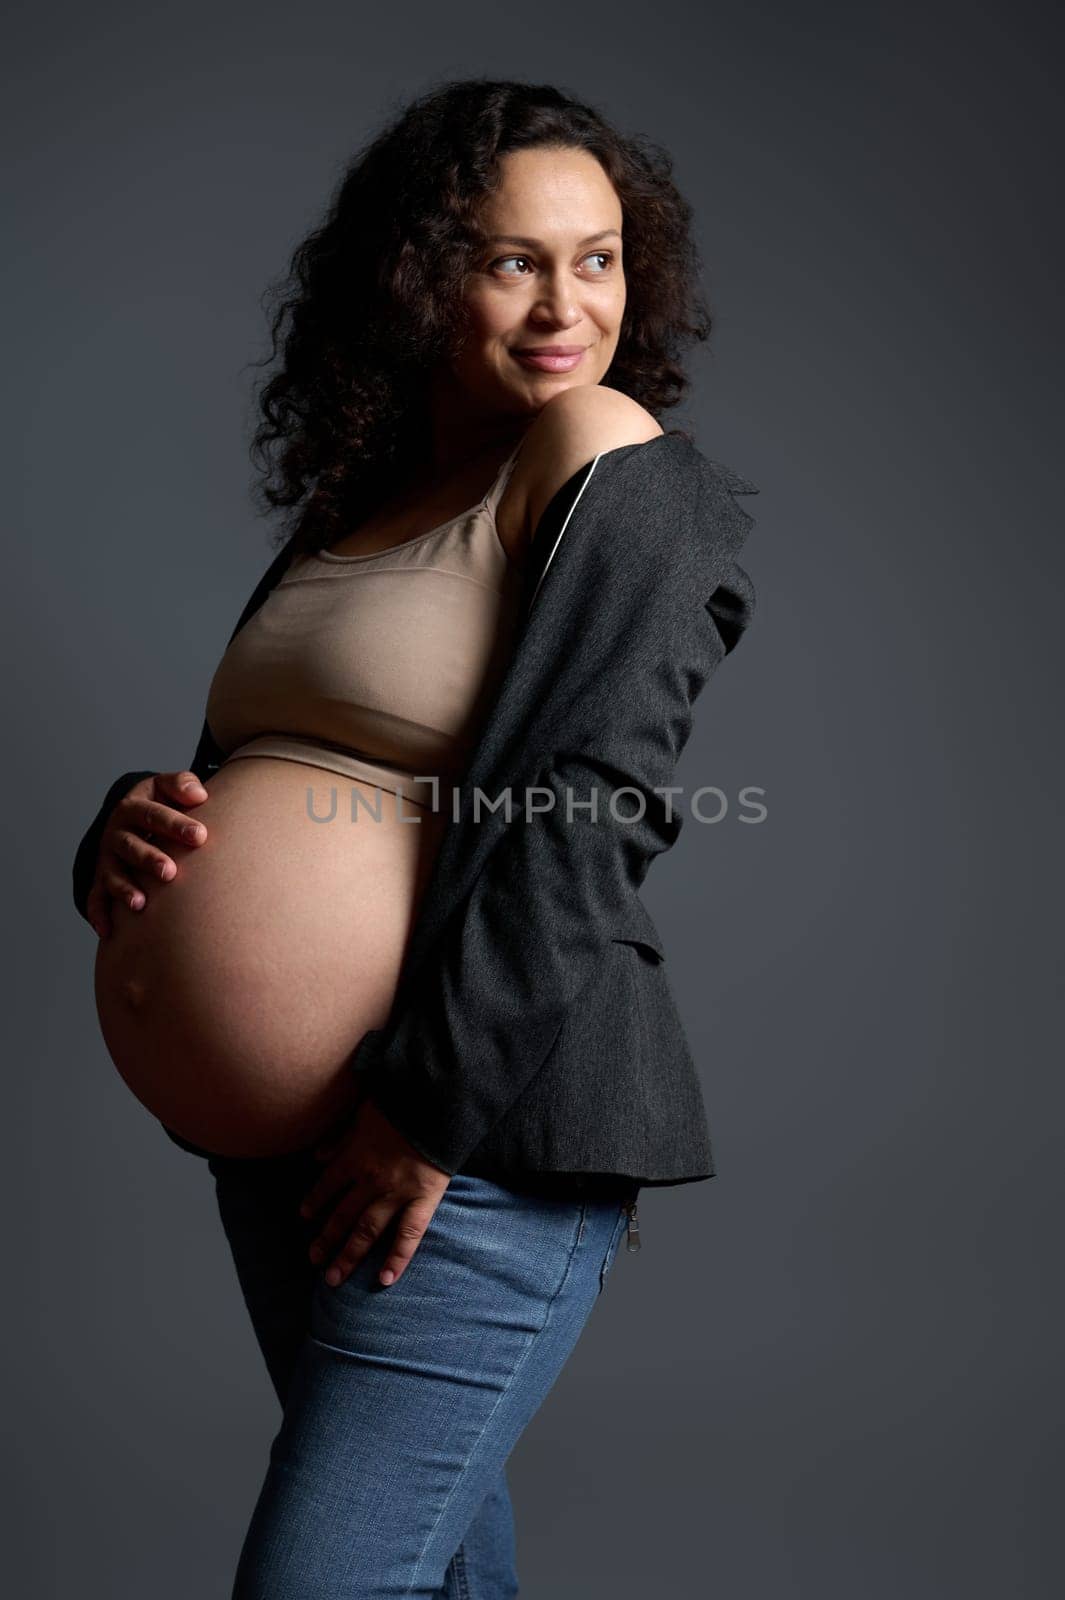 Stylish elegant pregnant woman poses bare belly, smiles looking aside, isolated on gray studio background. Happy carefree pregnancy and maternity concept. Portrait of a gravid expectant young mother